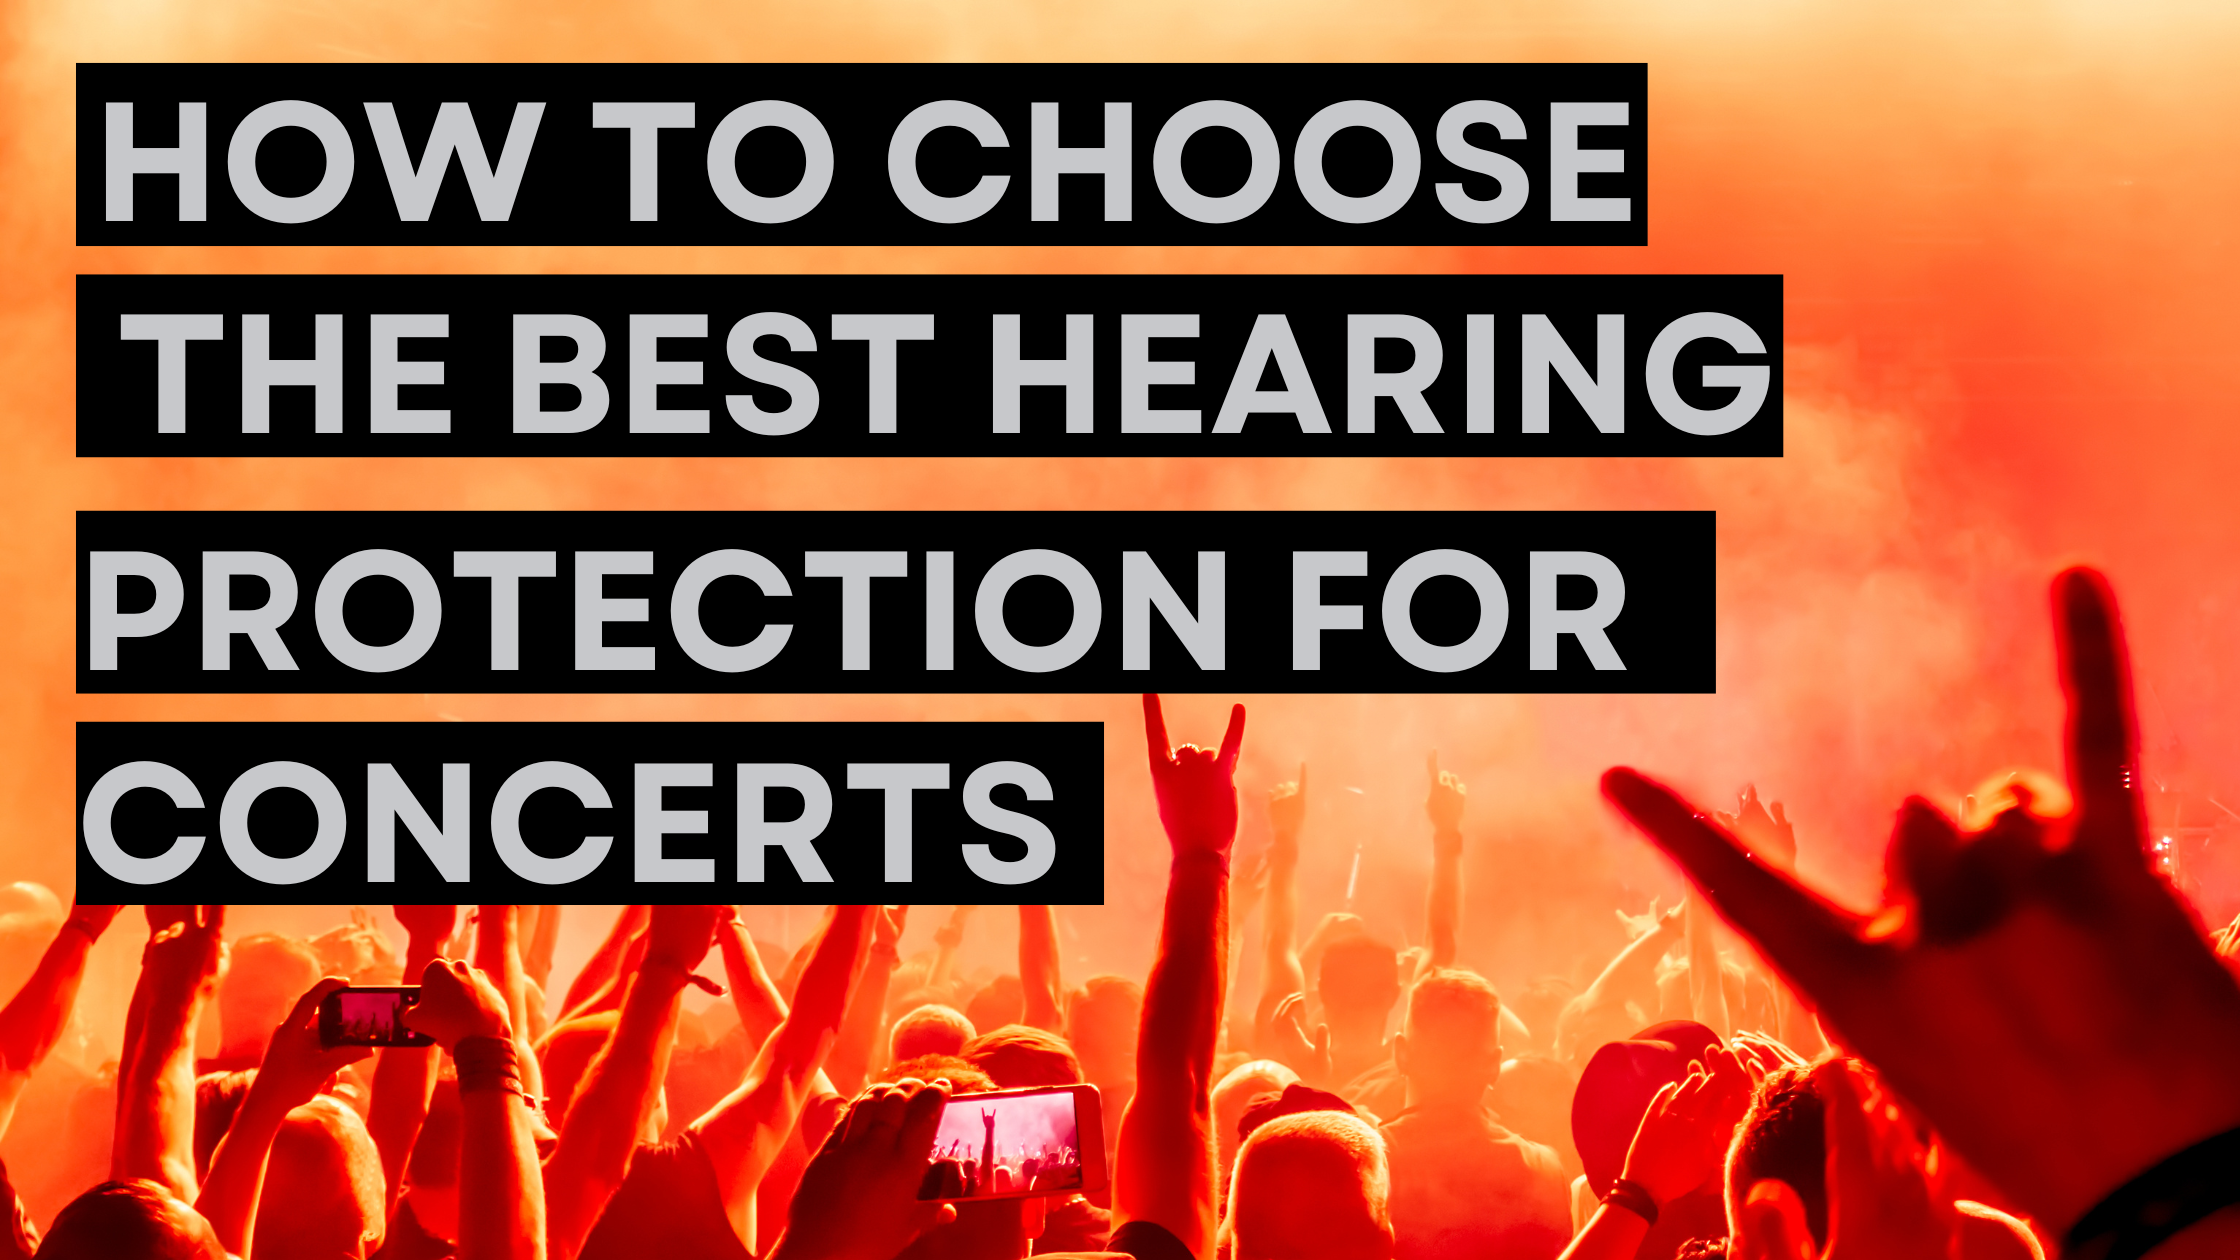 How to Choose the Best Hearing Protection for Concerts